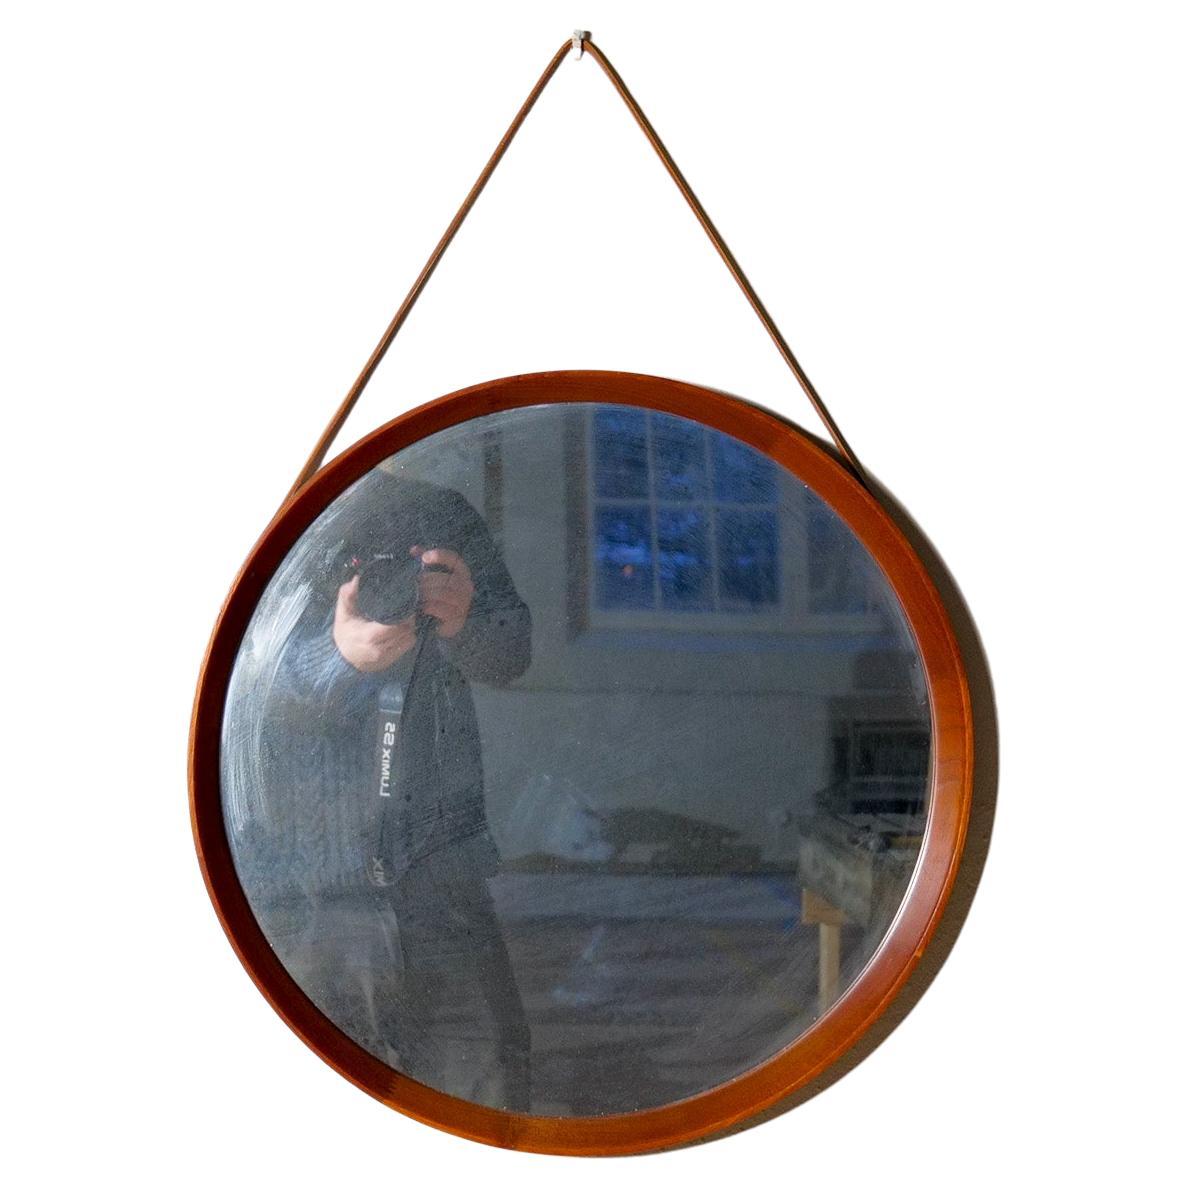 Wonderful organic rounded wall mirror produced by AB Glas & Trä, Hovmantorp, Sweden. This rounded and crafted crystal mirror glass was med with a teak frame and leather. 

Good vintage condition, with some scratches on the wood. Distressed